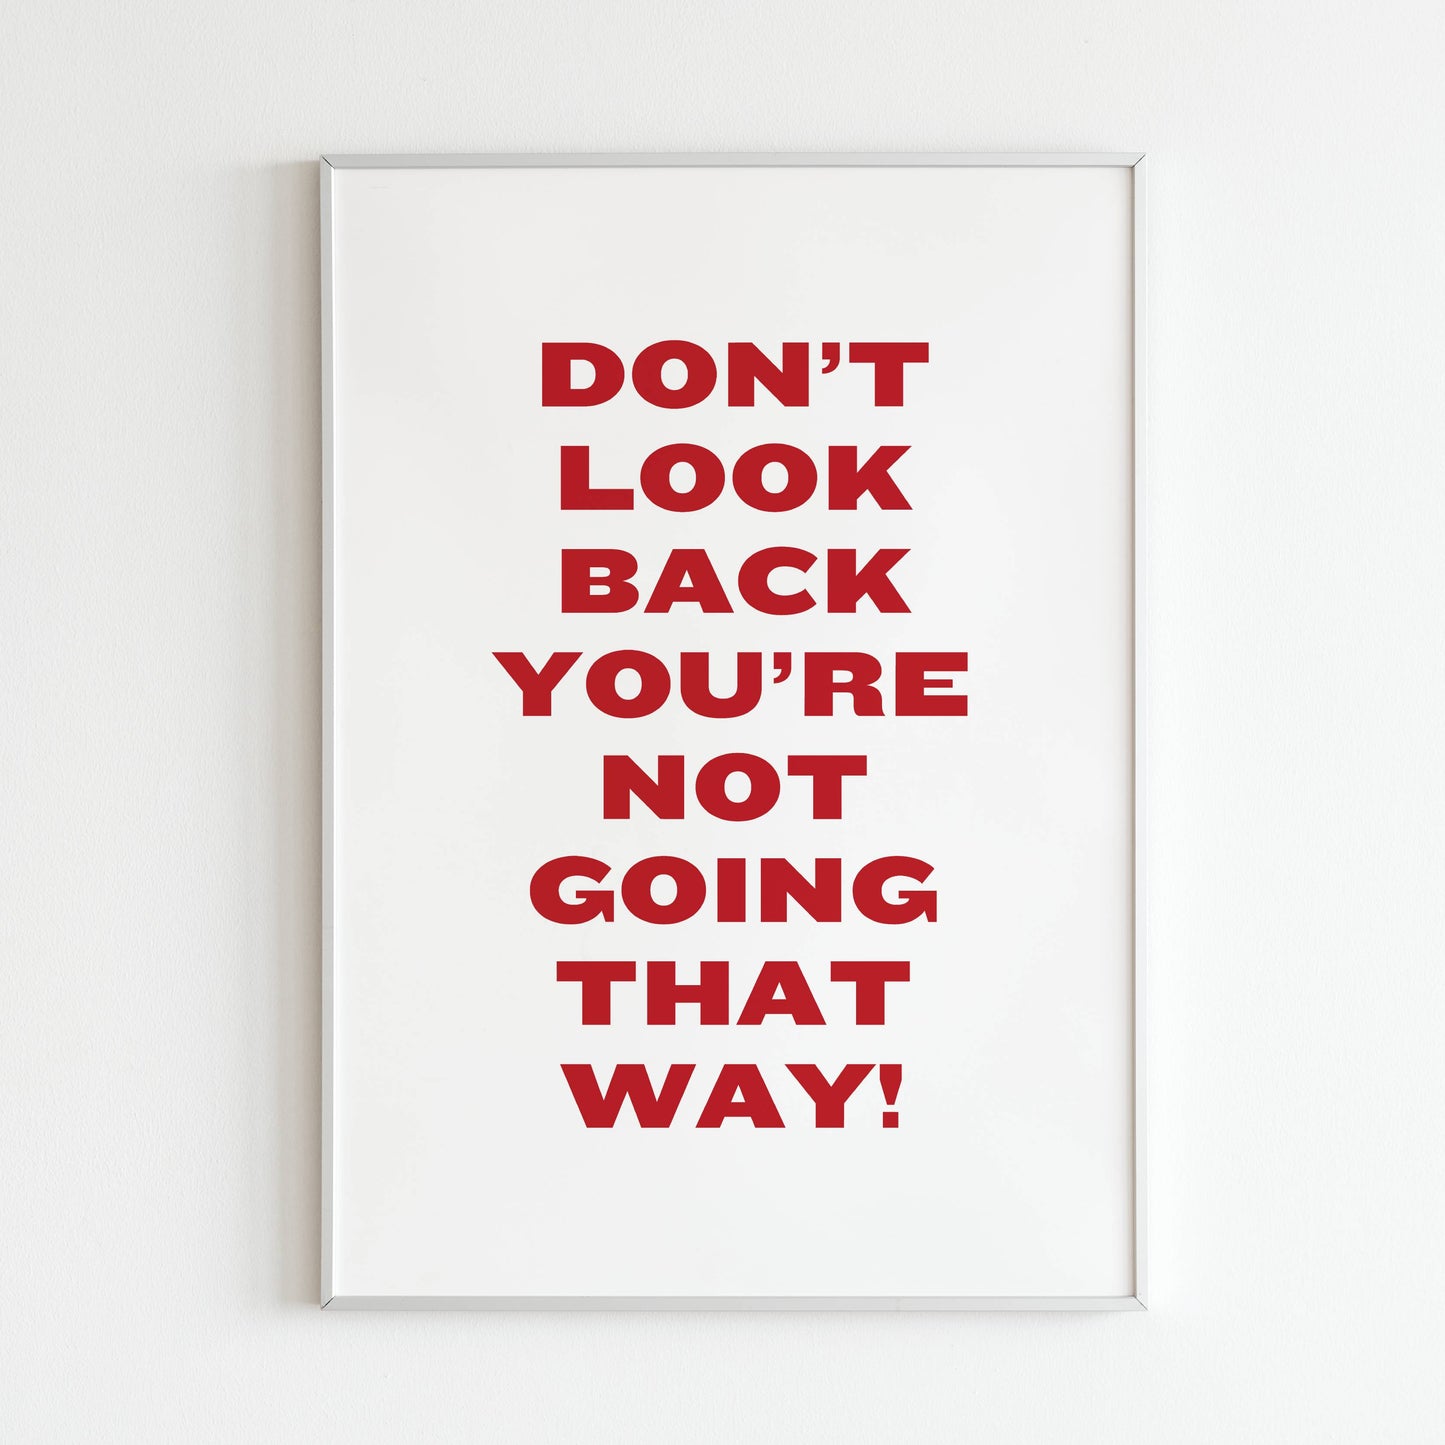 Downloadable inspirational wall art for moving forward